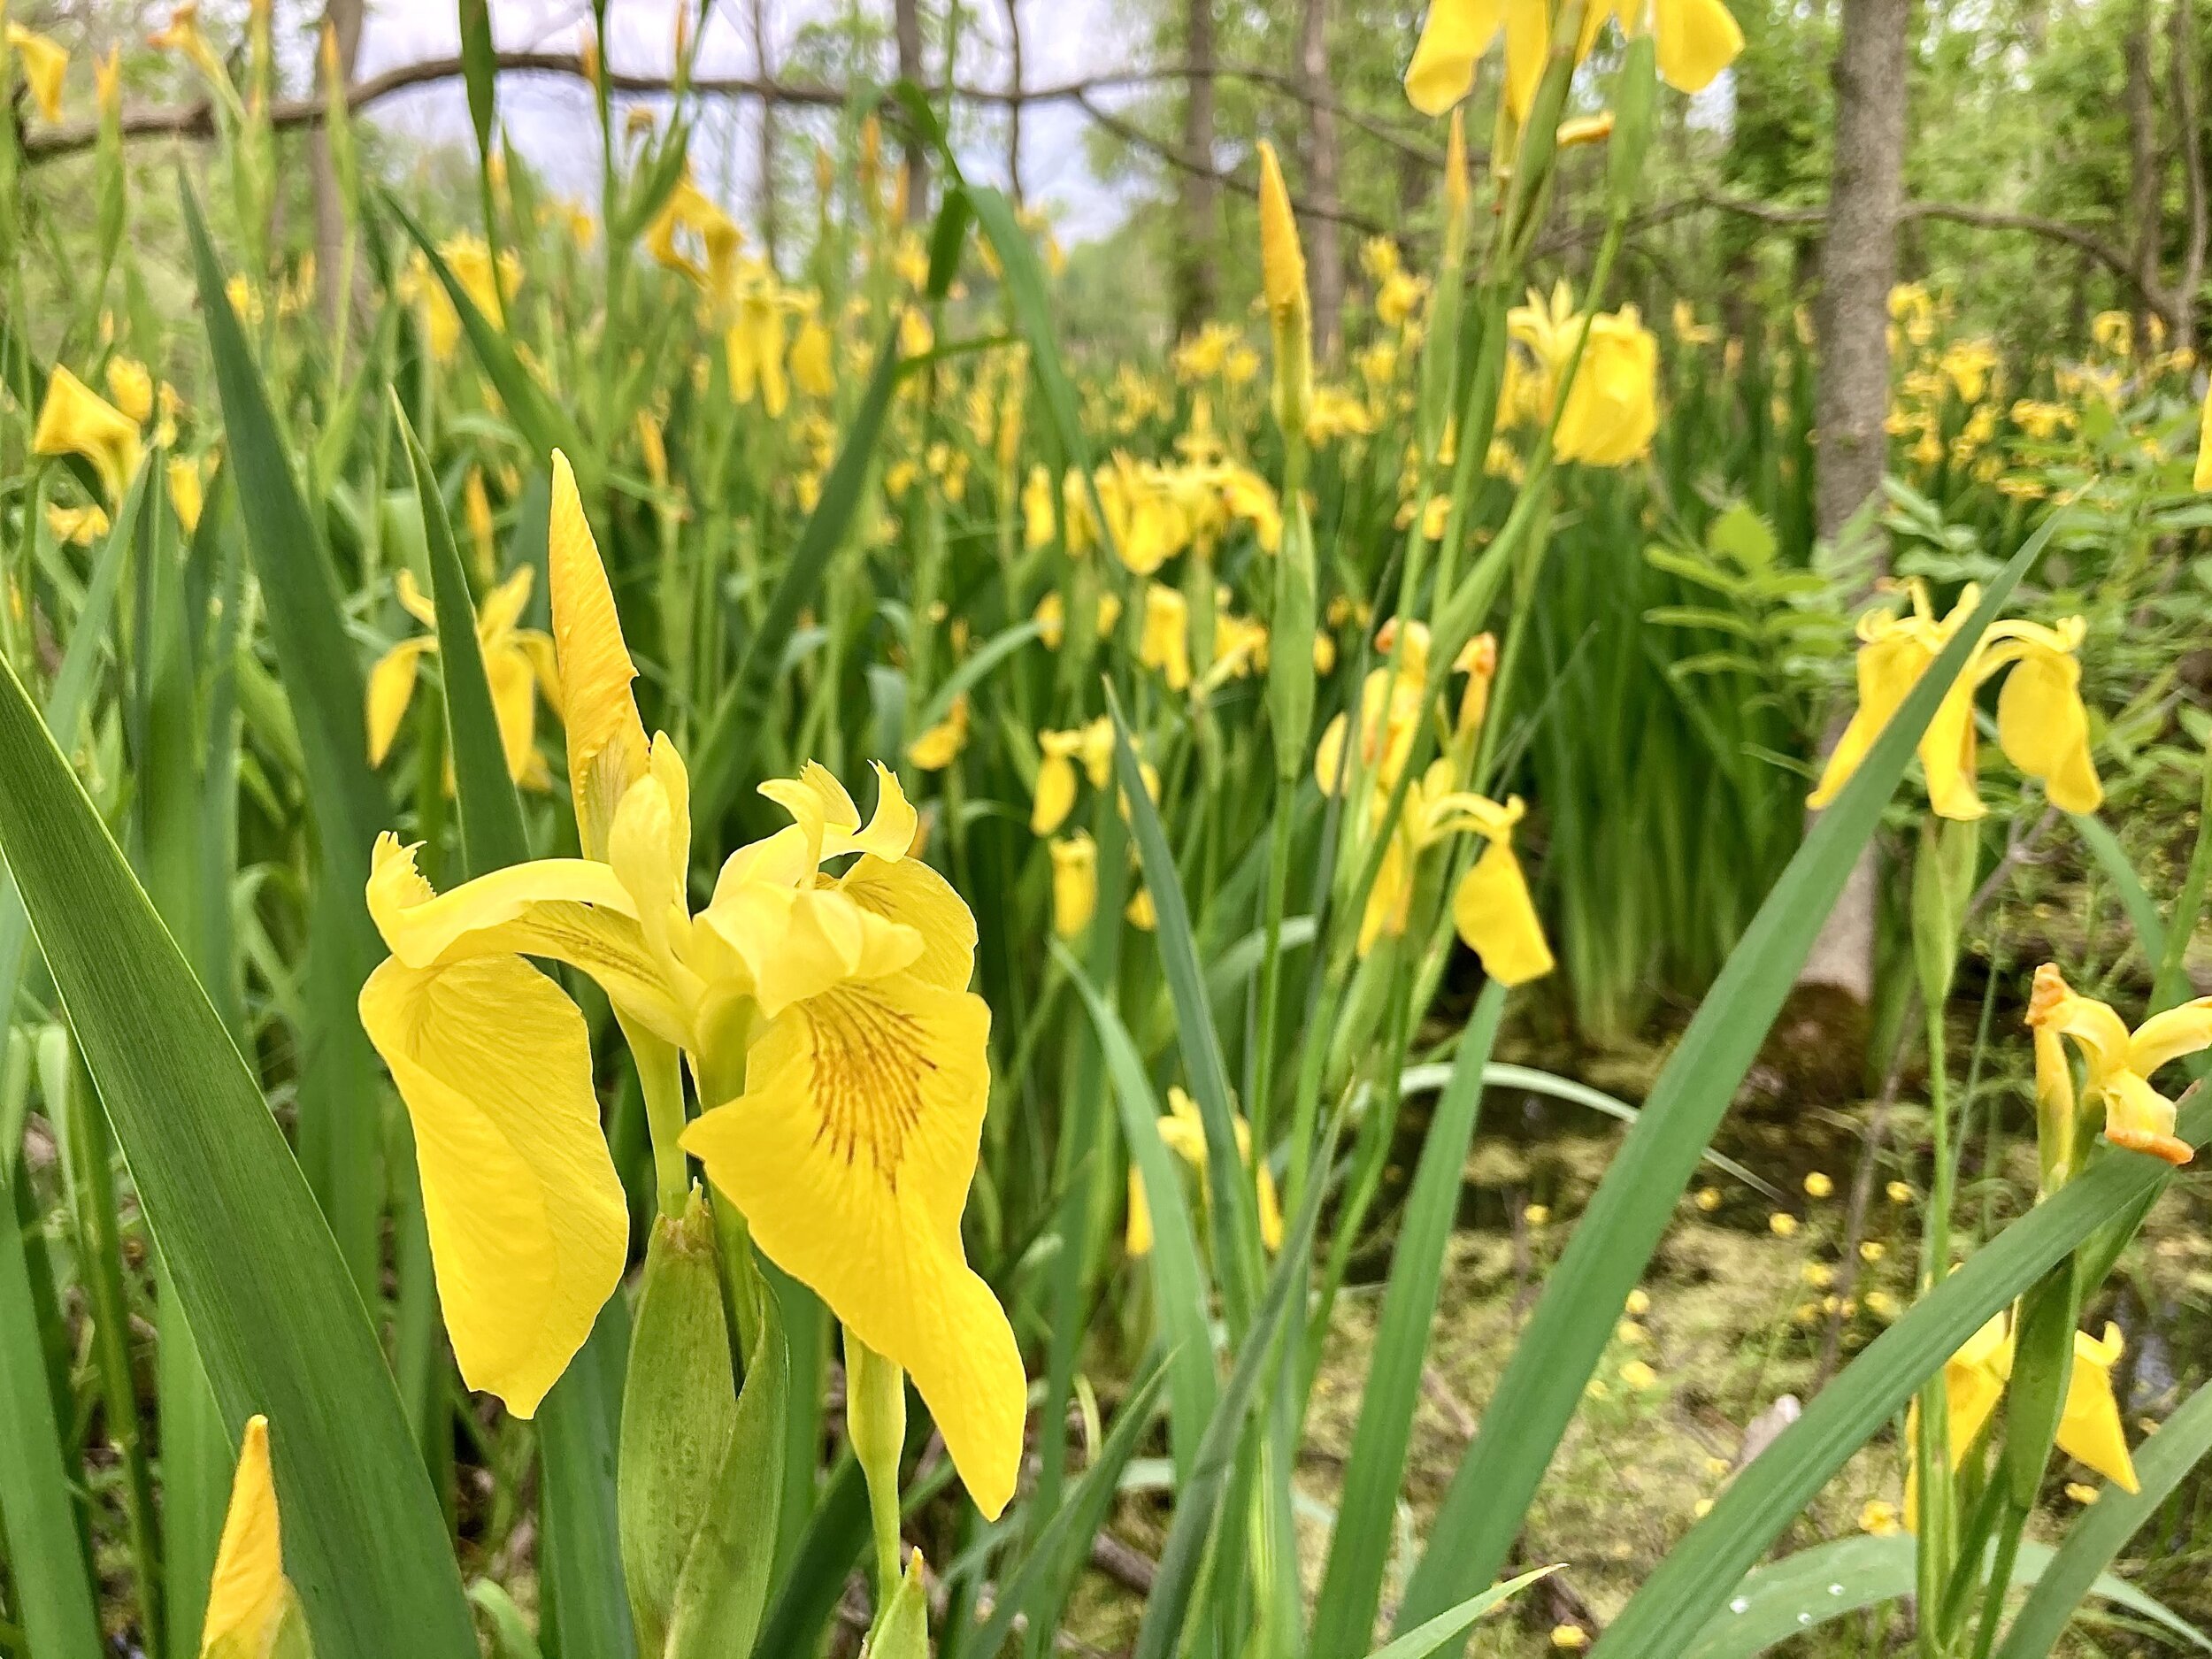 A field of bright yellow swamp irises and their deep green stalks